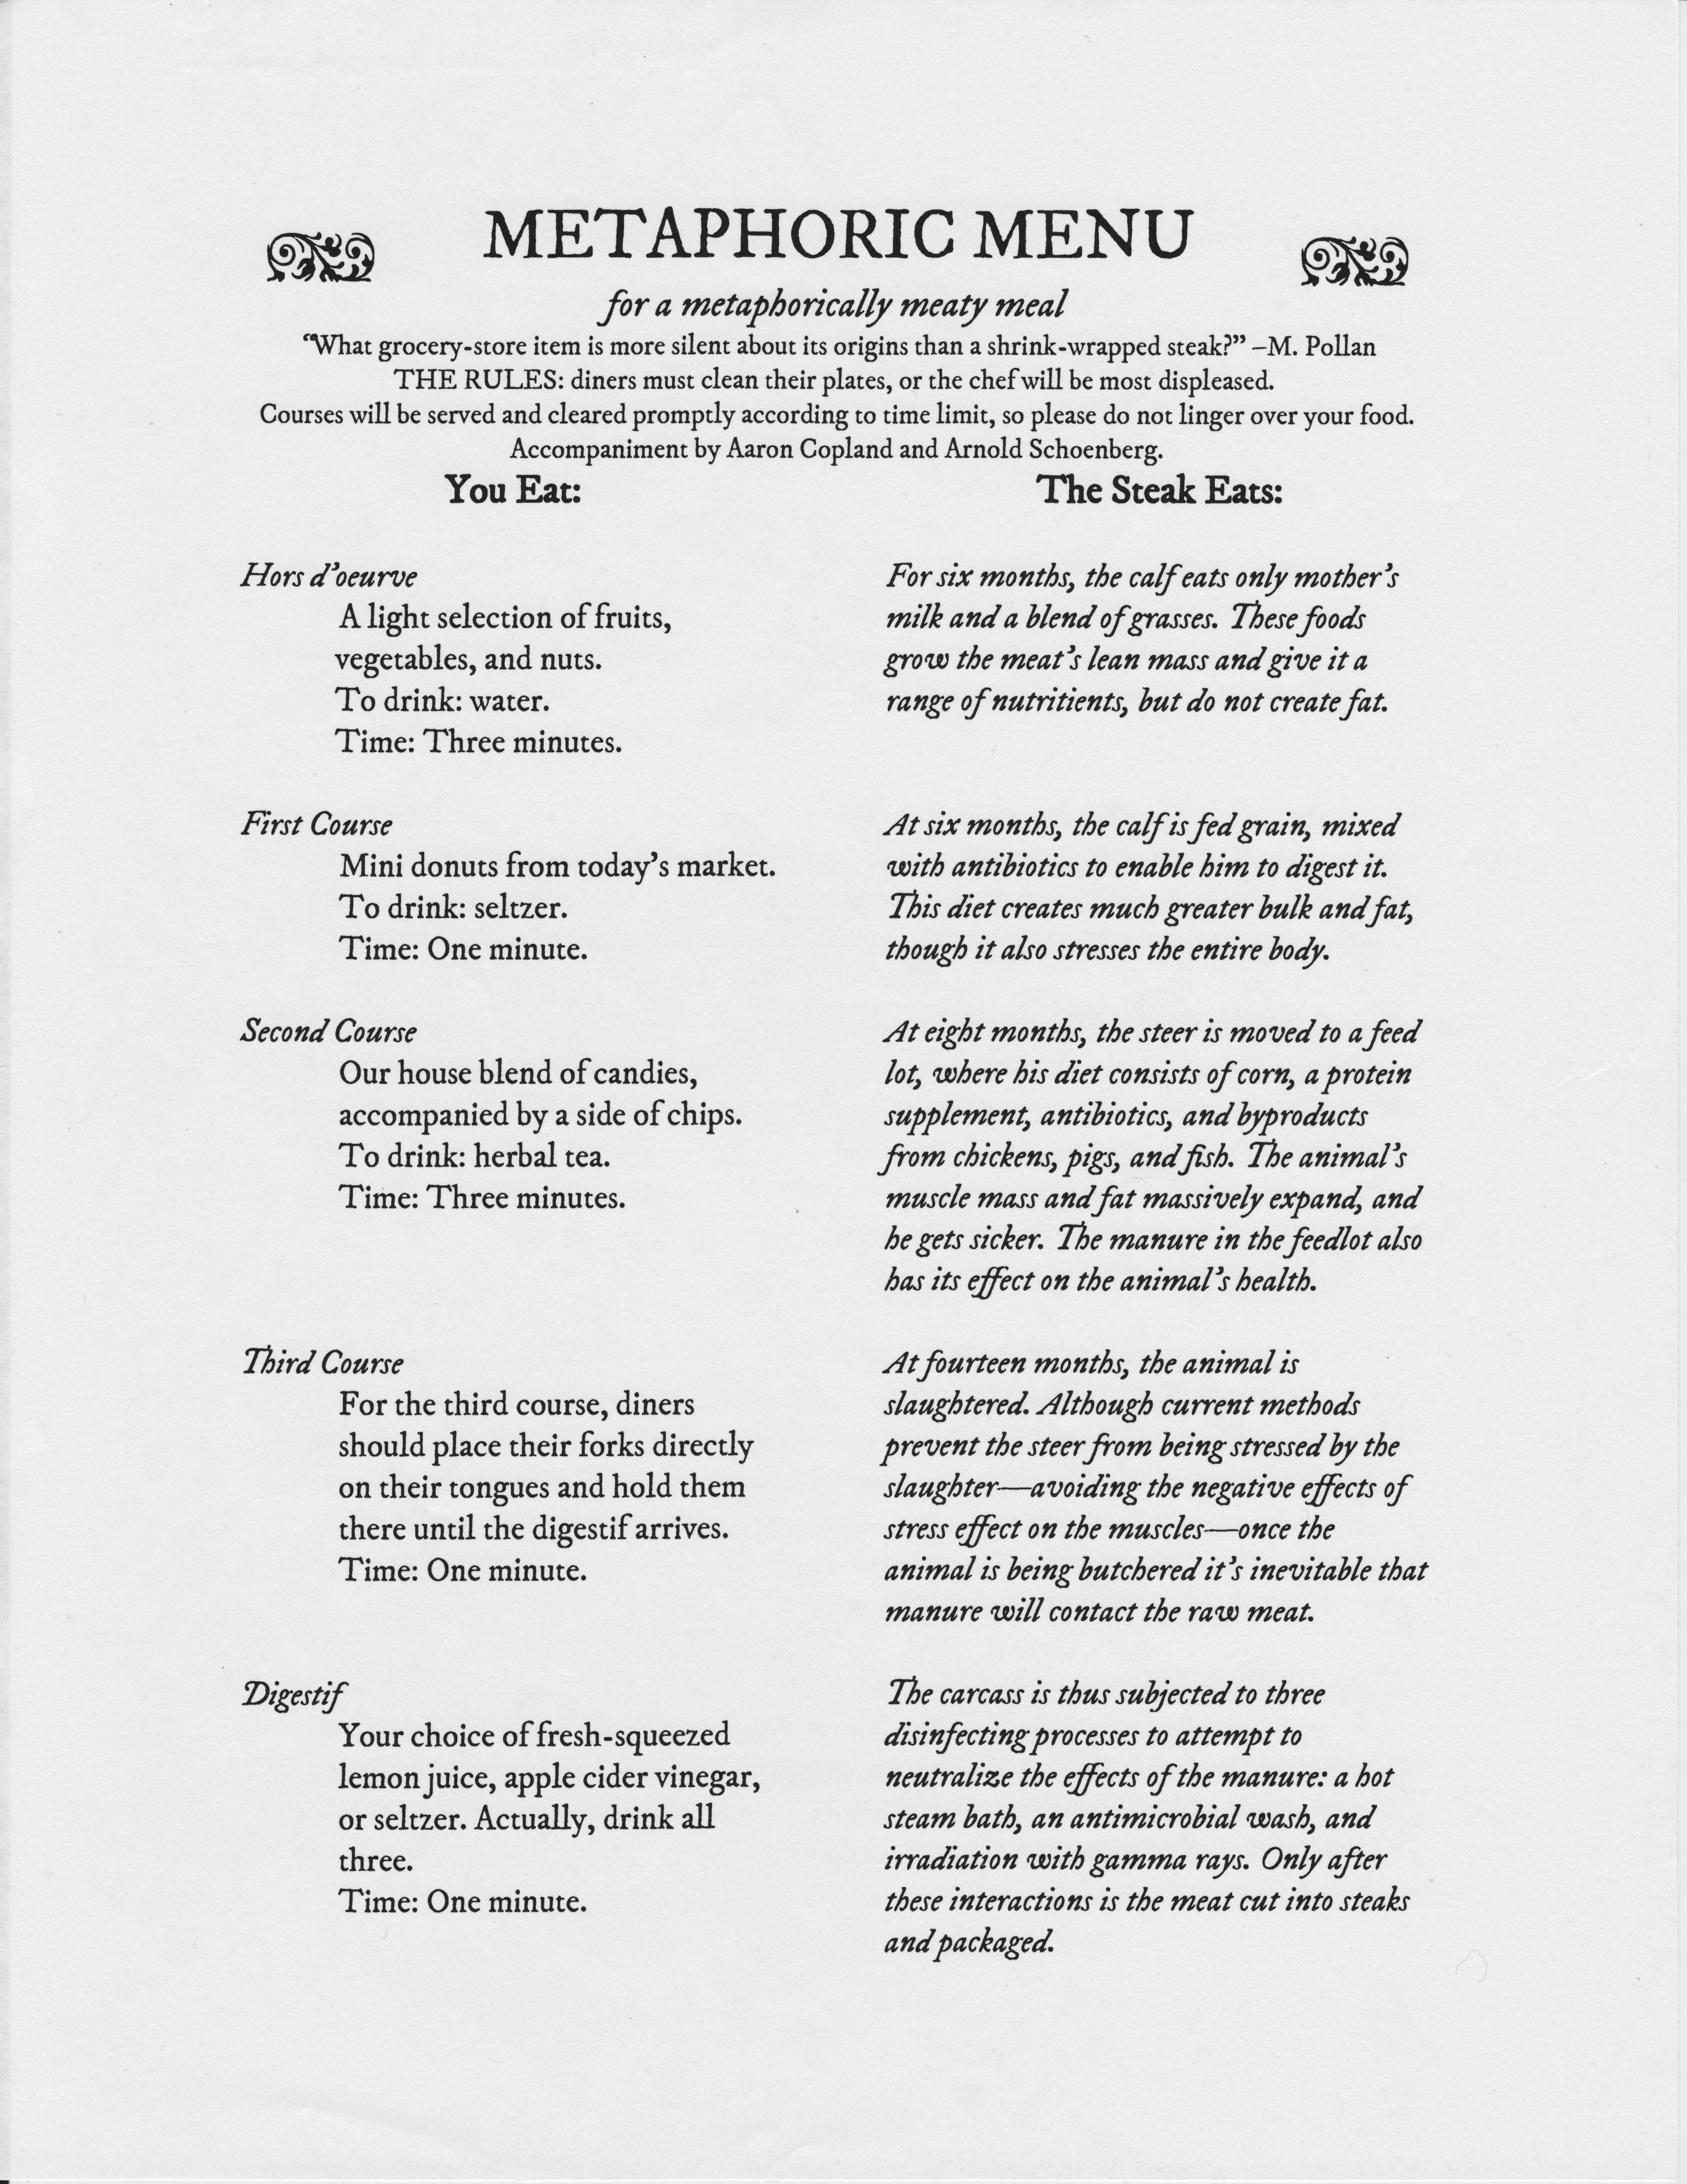 Student Matt's Metaphorical Menu. Beneath some introductory text, the menu is arranged in two columns: the left describes what 'you eat' and the right describes what 'the steaks eat.' The typeface is serif. Introductory Text: METAPHORIC MENU for a metaphorically meaty meal 'What grocery-store item is more silent about its origins than a shrink-wrapped steak?